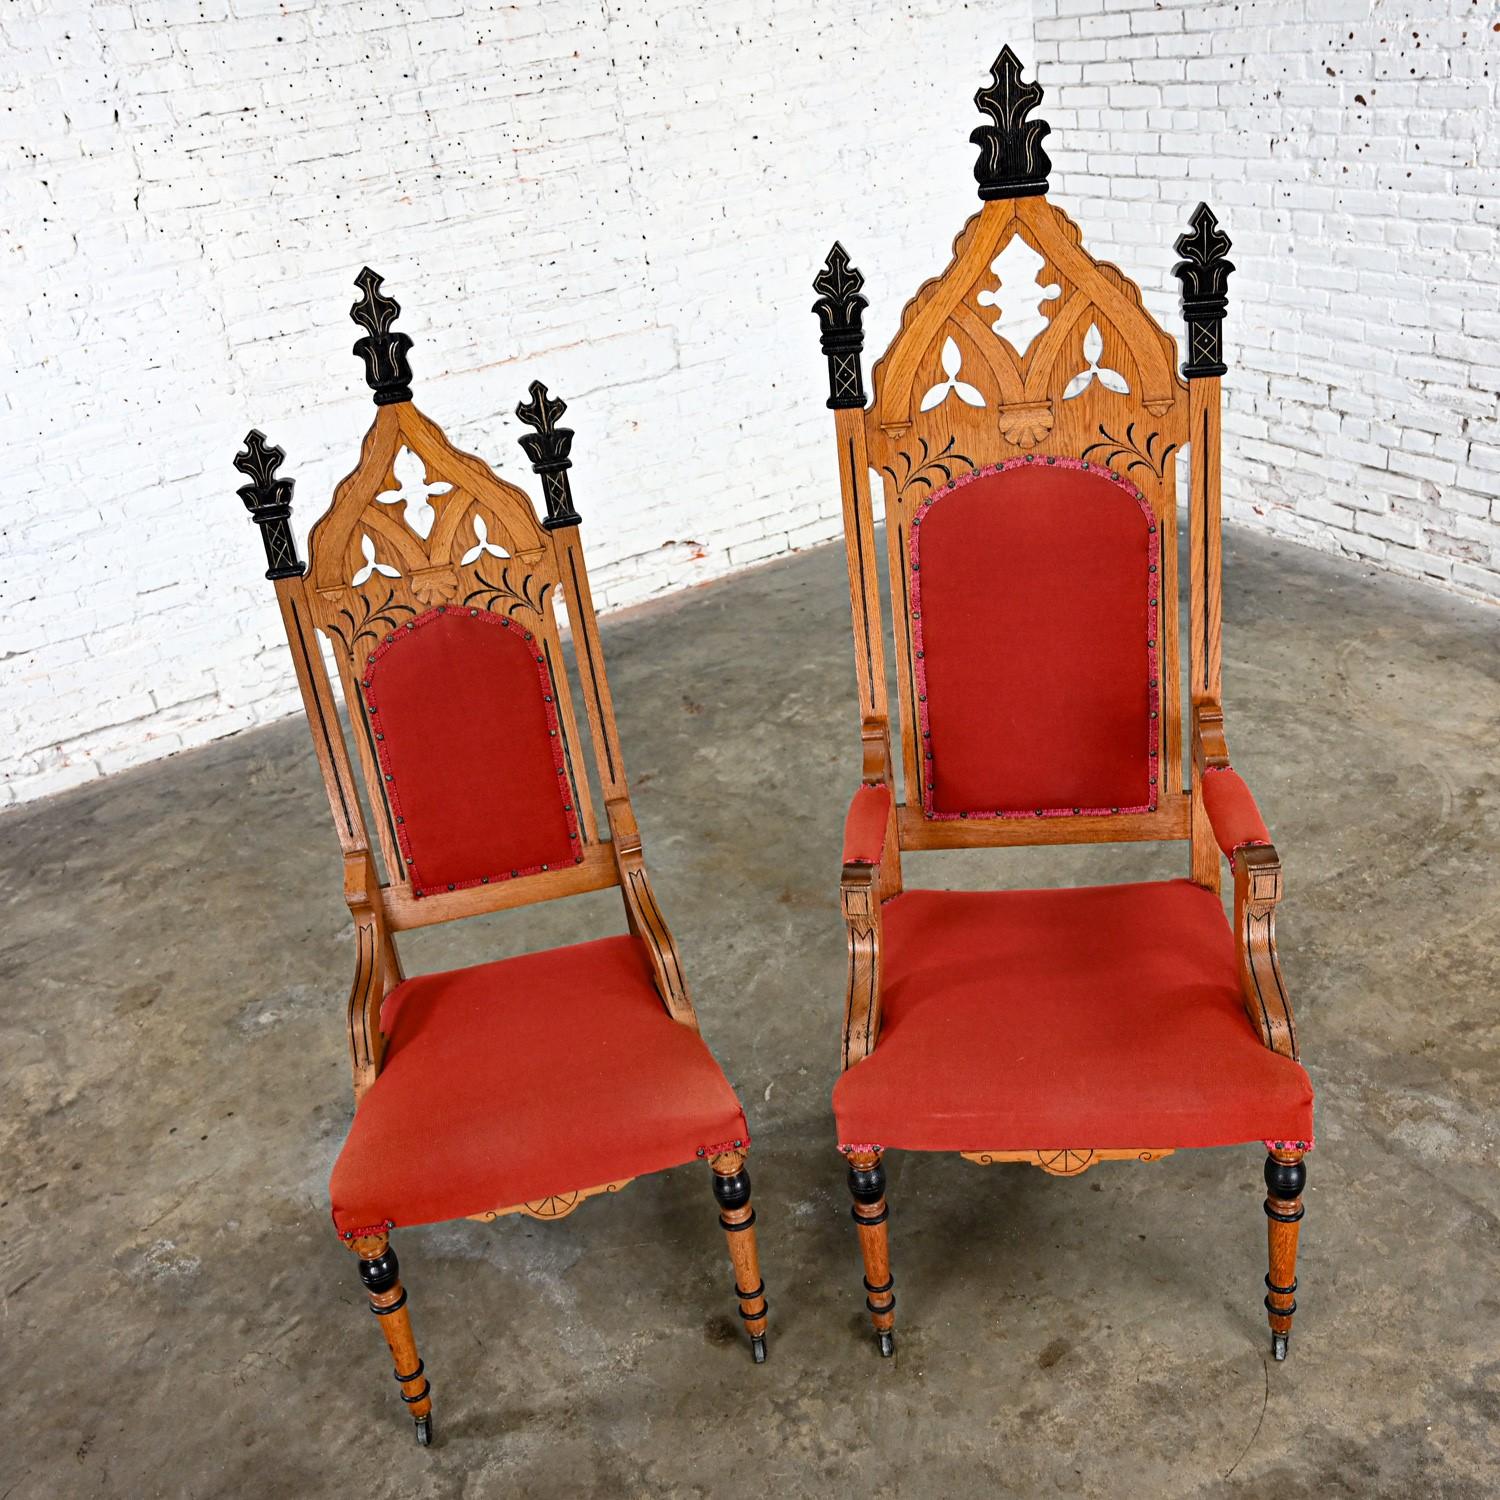 Incredible Late19th Century to Early 20th Century Victorian or Gothic Revival Ecclesiastical His & Hers Throne Chairs comprised of oak frames with black and gold details, red hopsacking fabric on backs & seats with gimp and nail head trim & turned